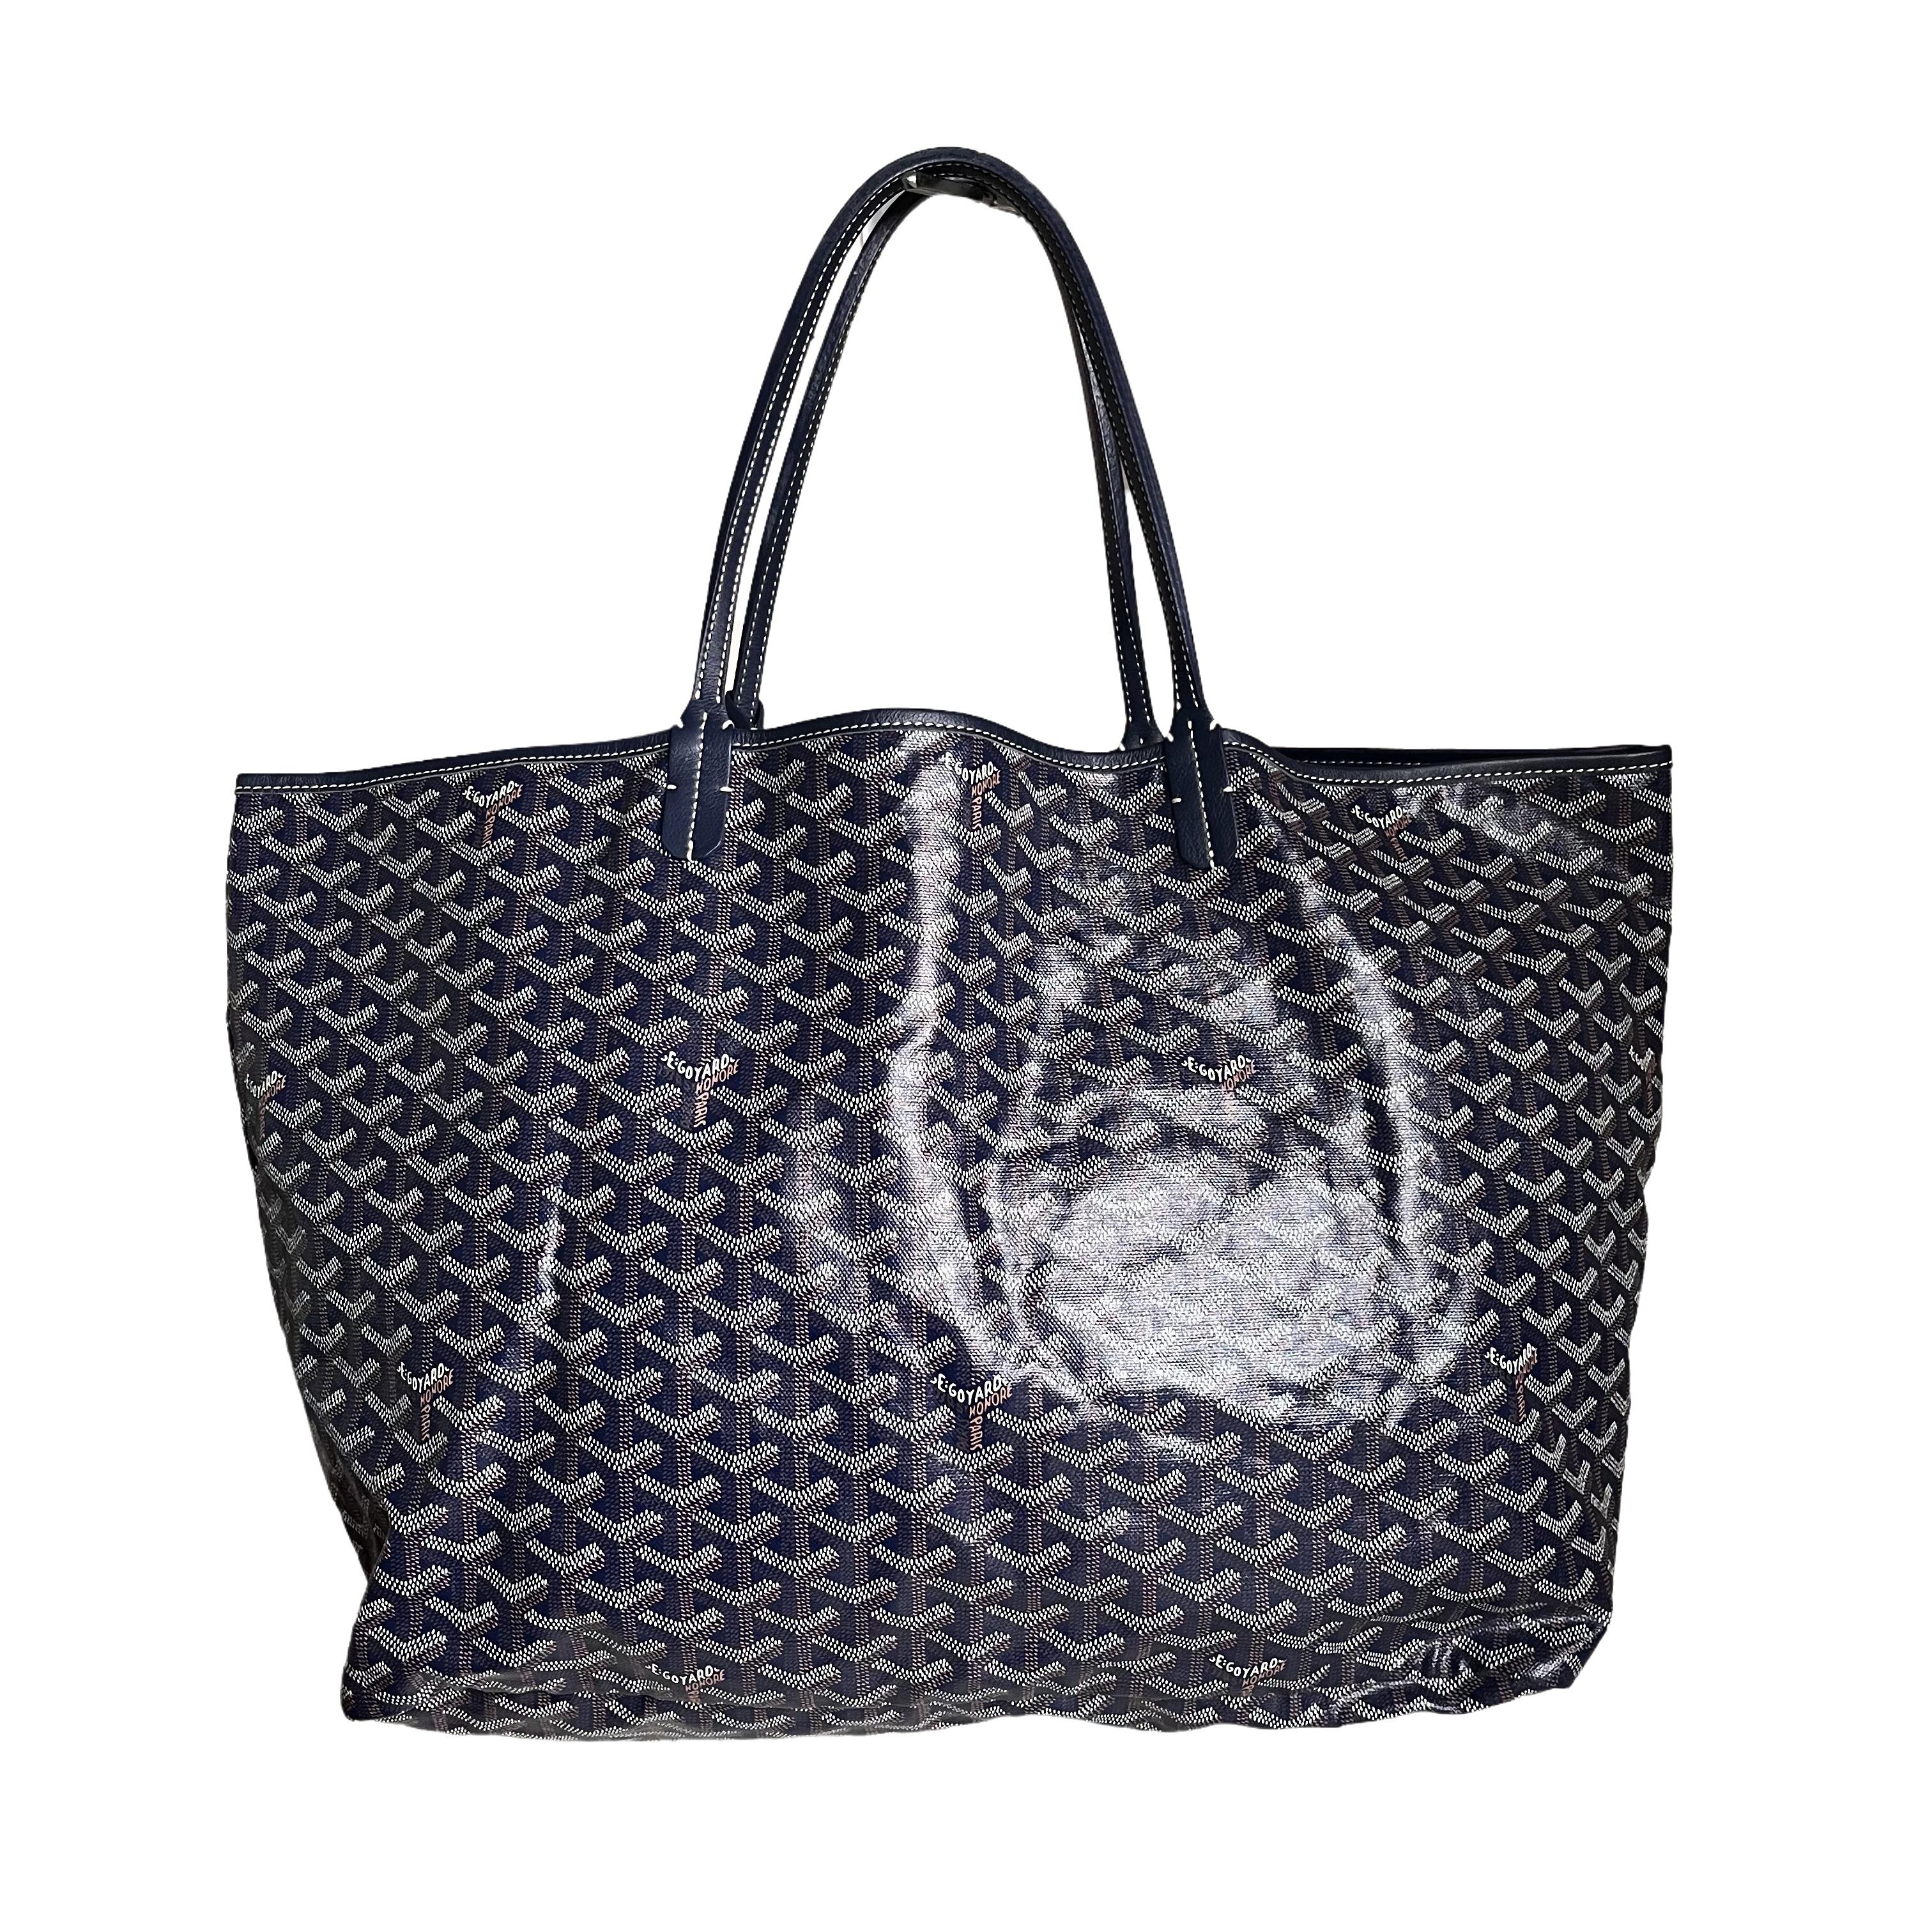 CONDITION: EXCELLENT

This preloved authentic handbag is in excellent condition with no signs of wear on the outside. There is light stains on the inside. 

DETAILS:

Brand: Goyard
Model: Saint Louis Tote
Origin Country: France
Year of Manufacture: